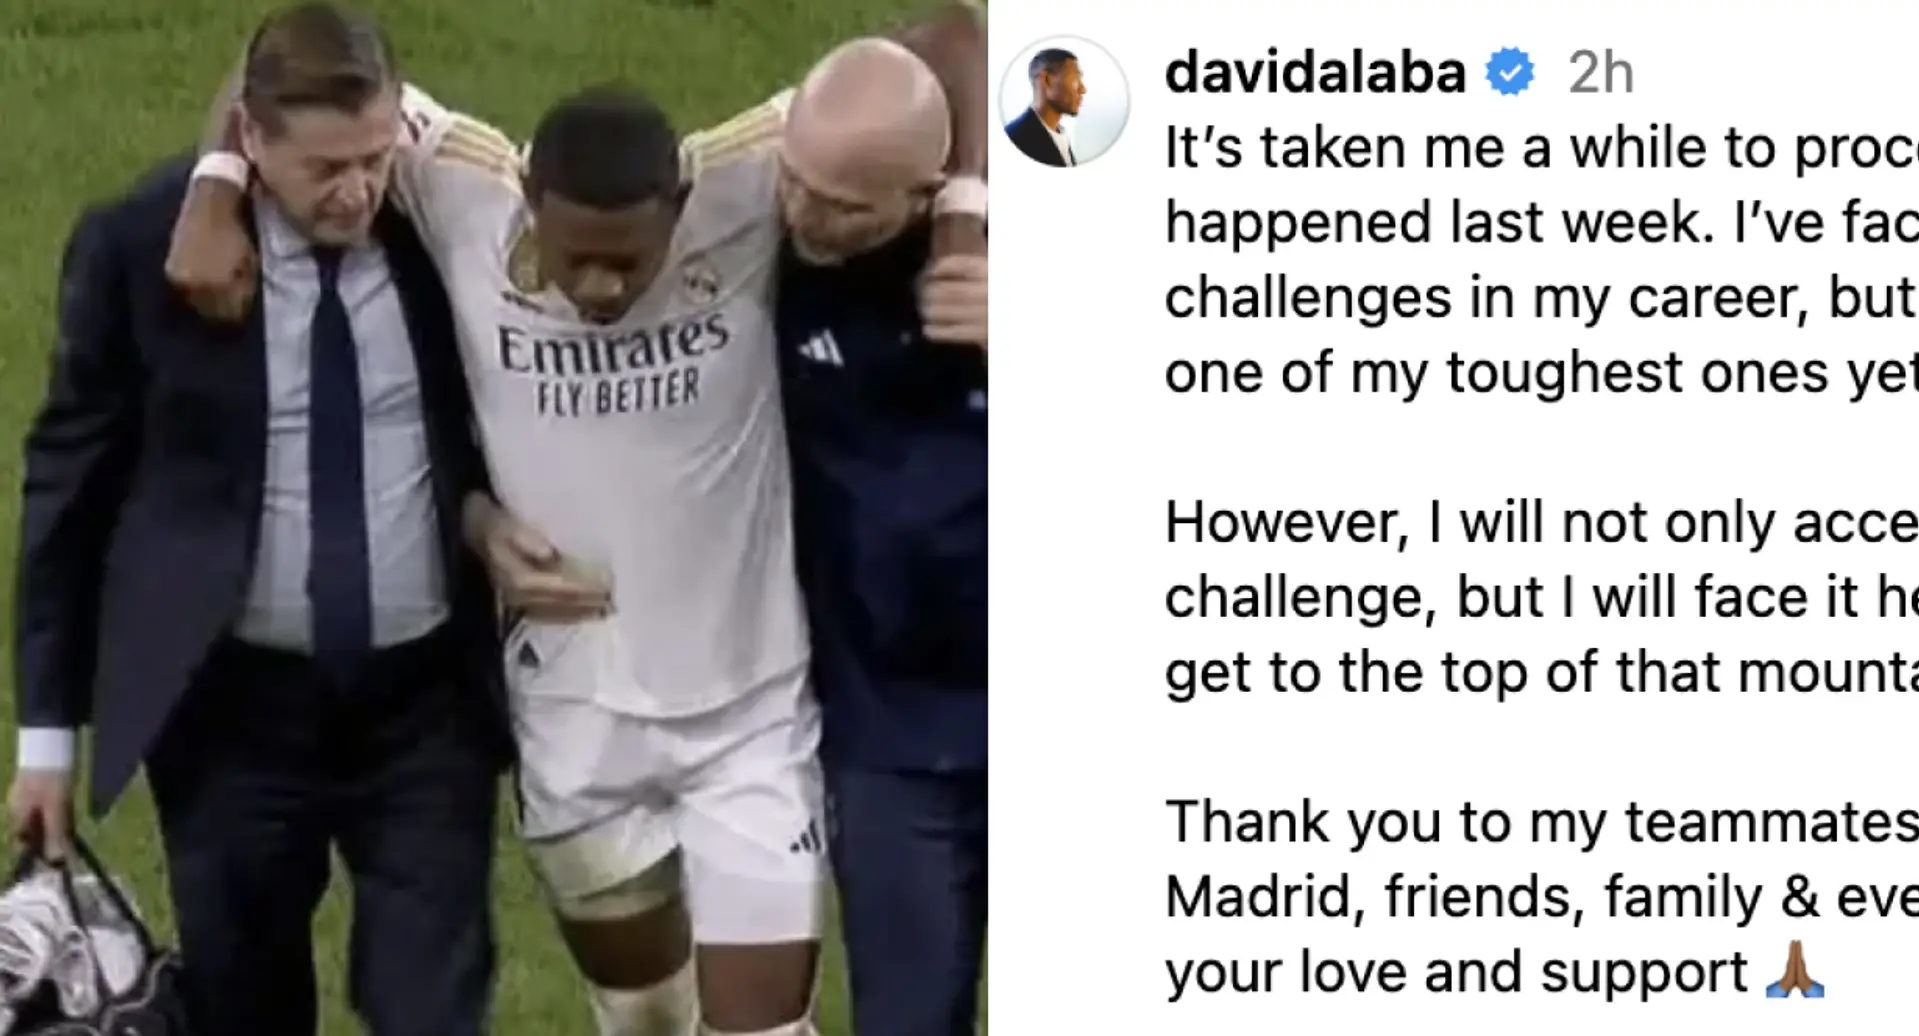 David Alaba addresses Real Madrid and fans in heartfelt message for the first time after ACL injury